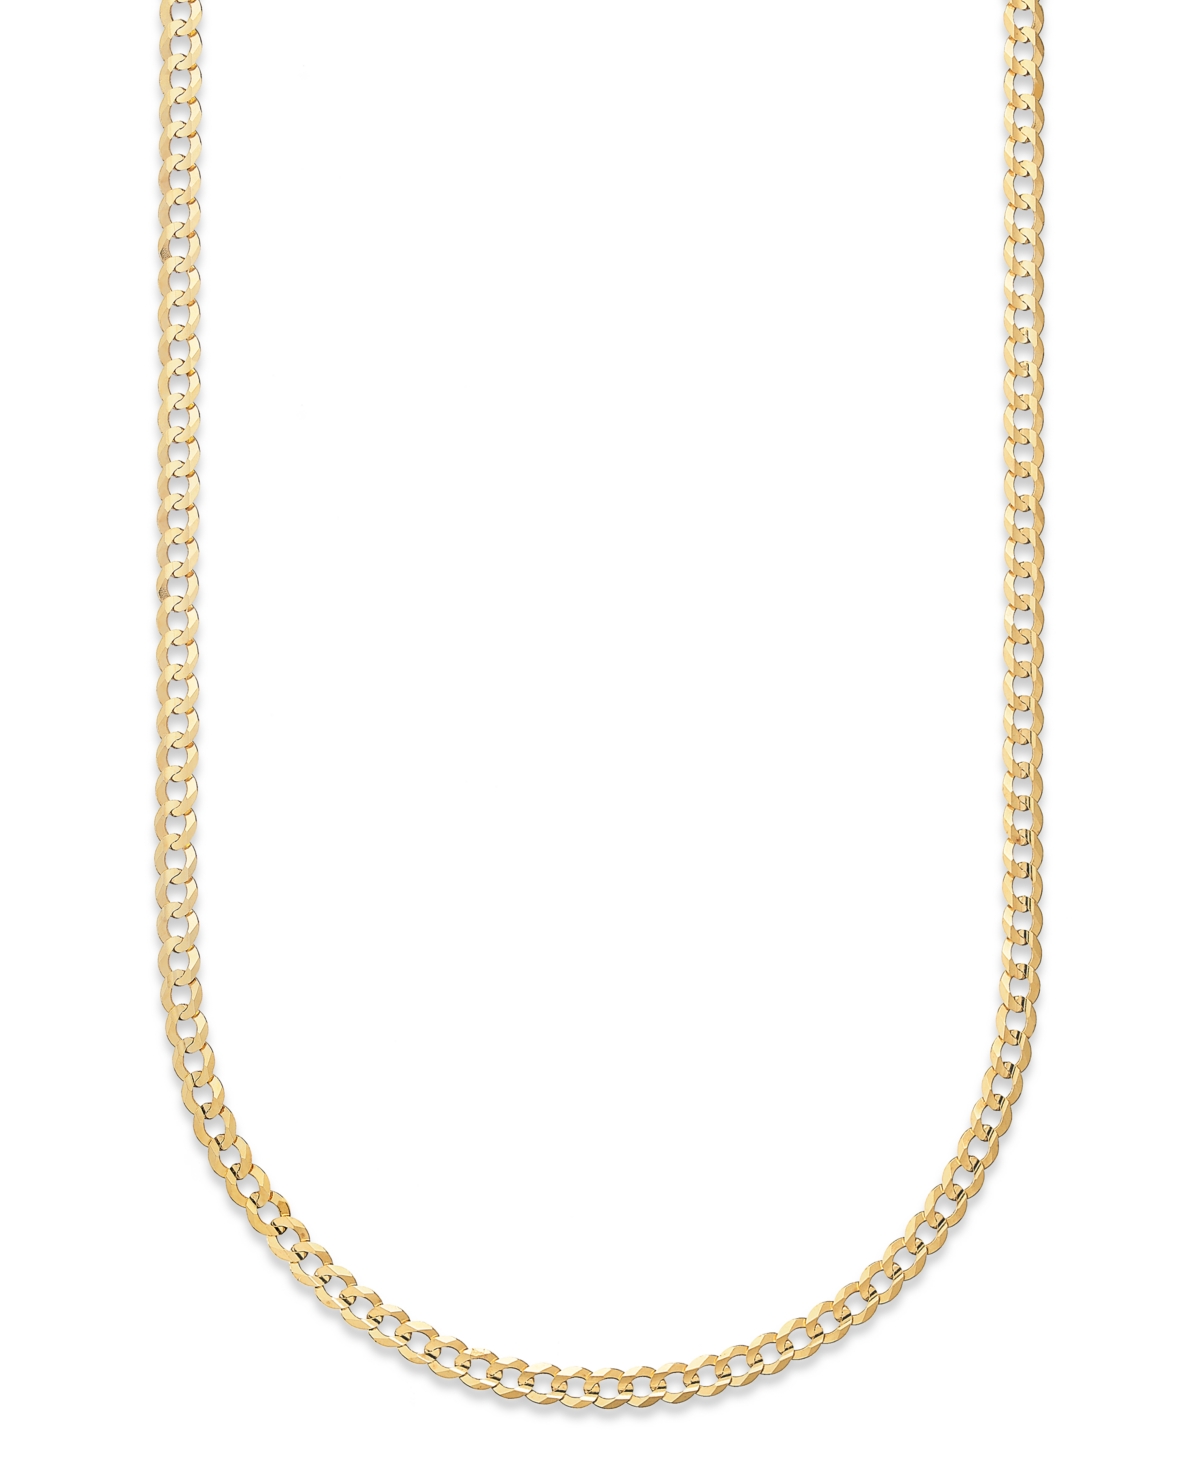 Italian Gold Curb Chain 22" Necklace (3-3/5mm) in Solid 14k Gold